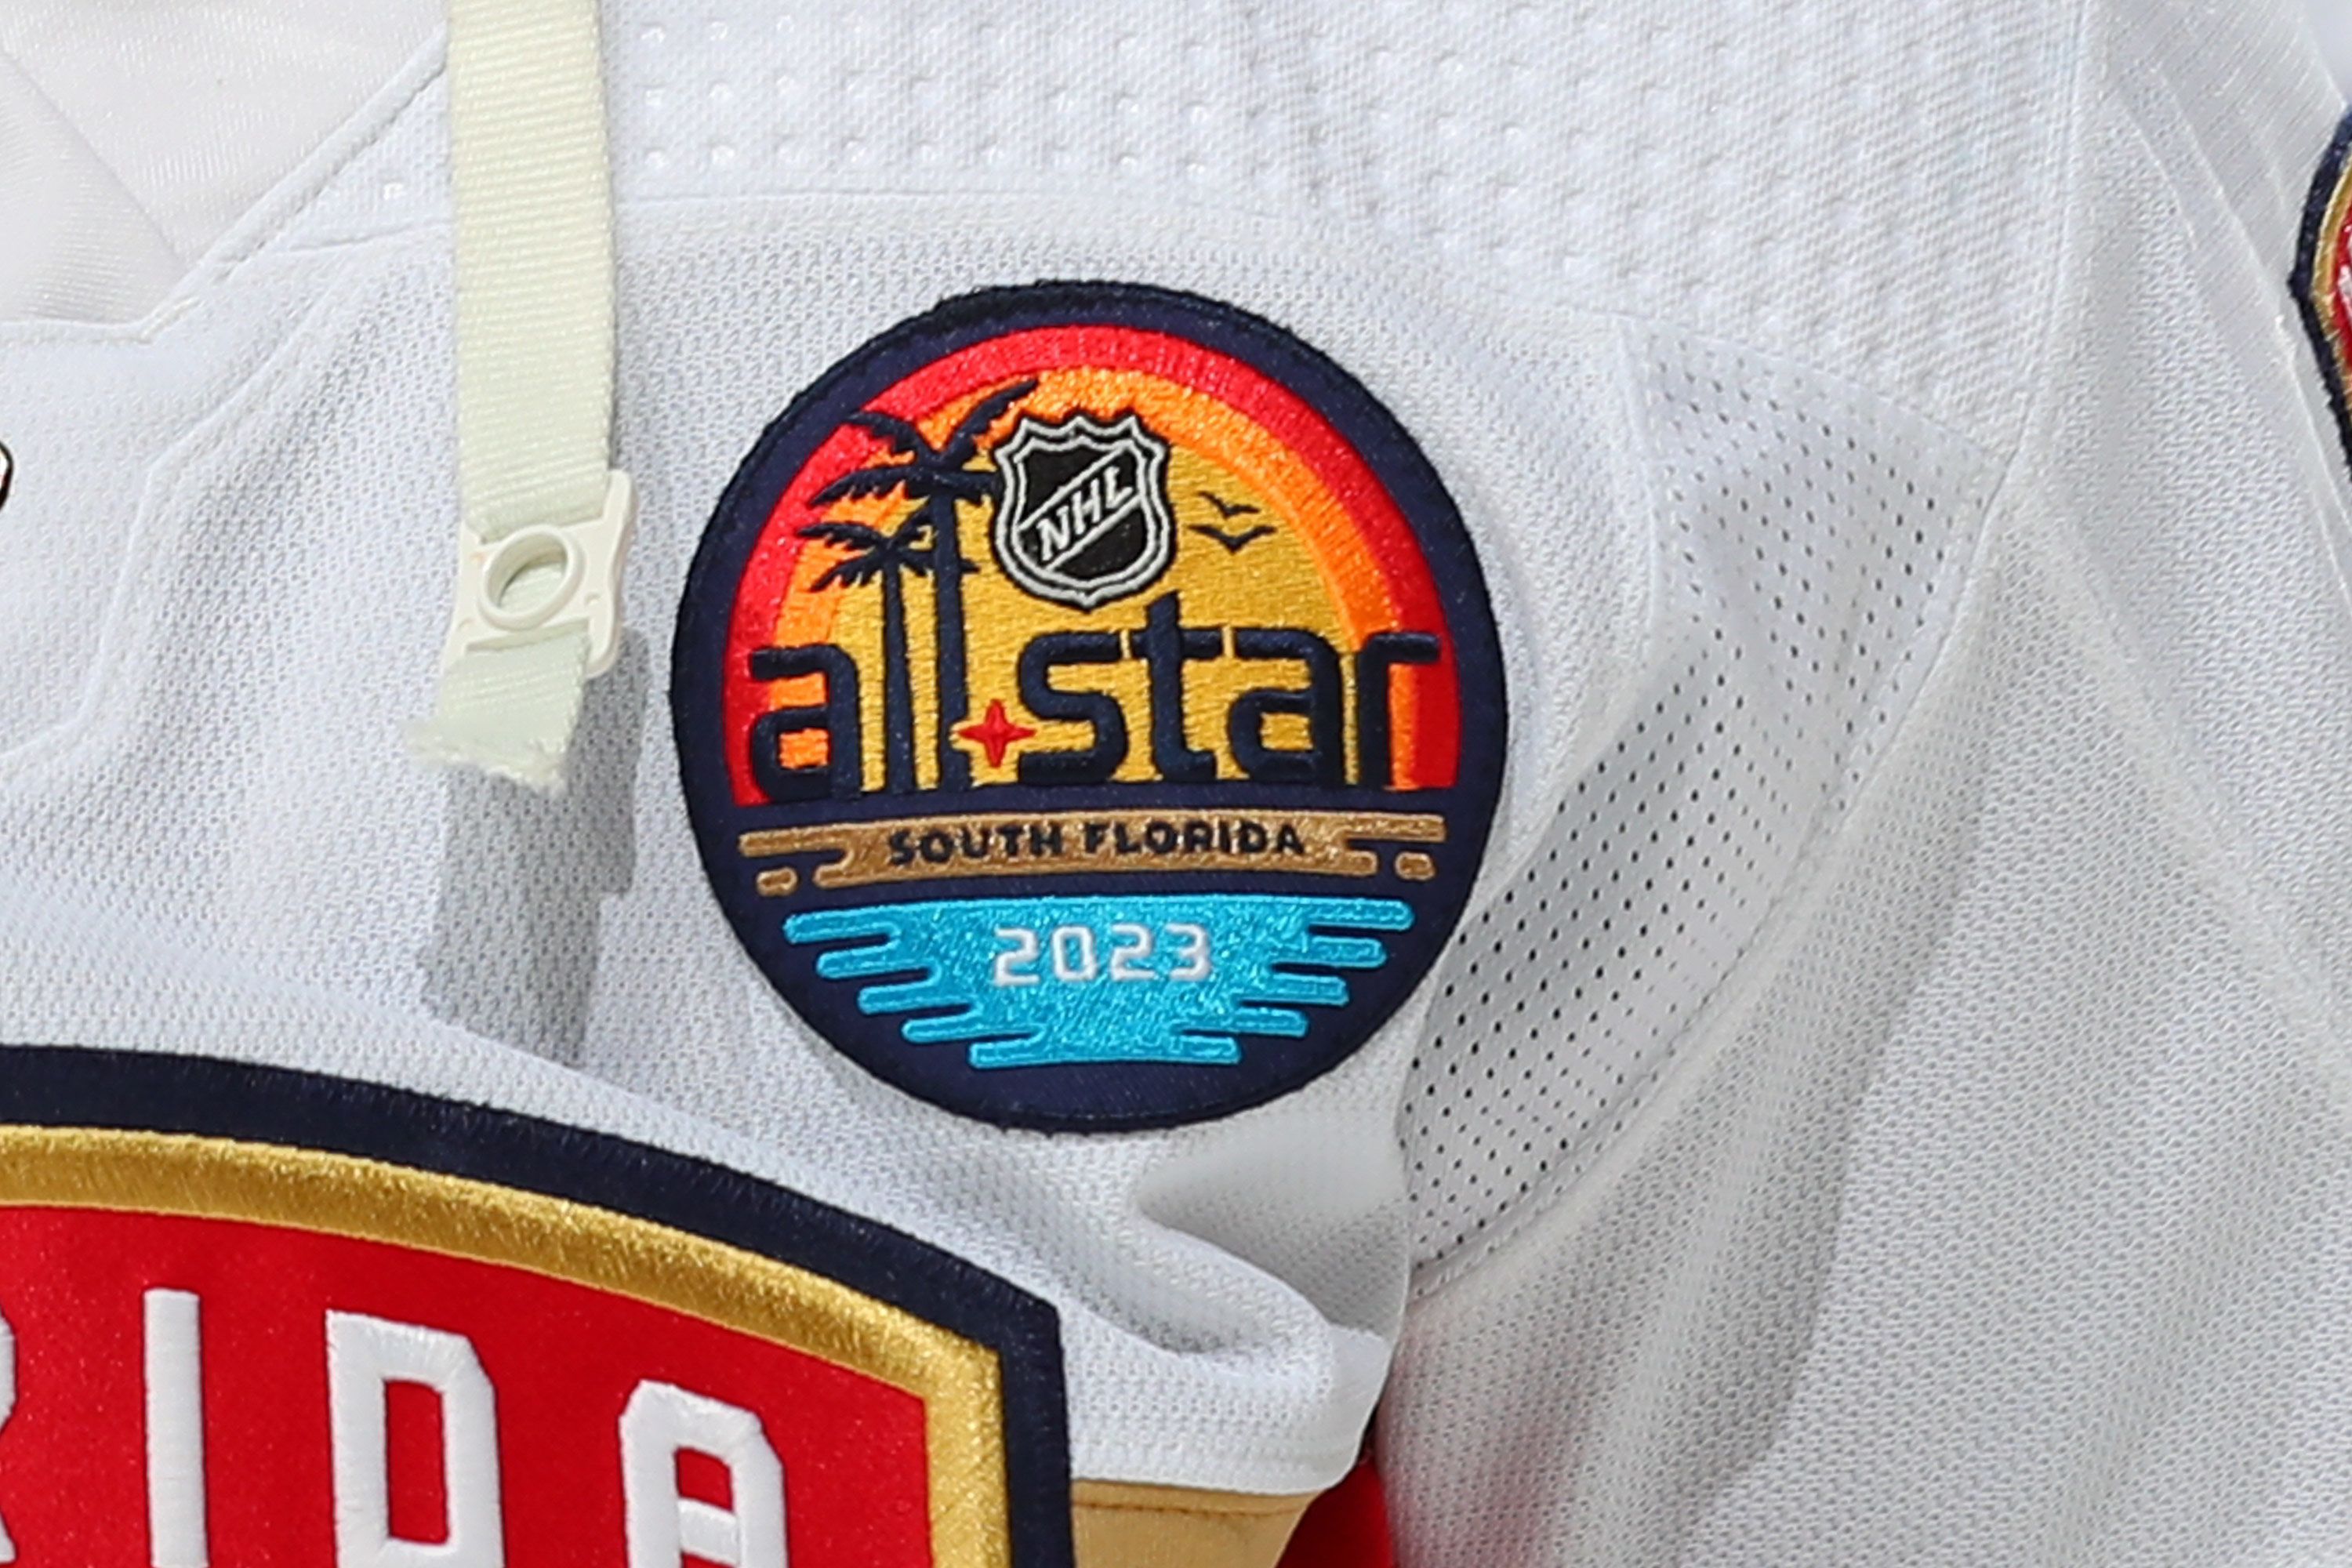 TravelHostFTL - The NHL All-Star Game is coming to South